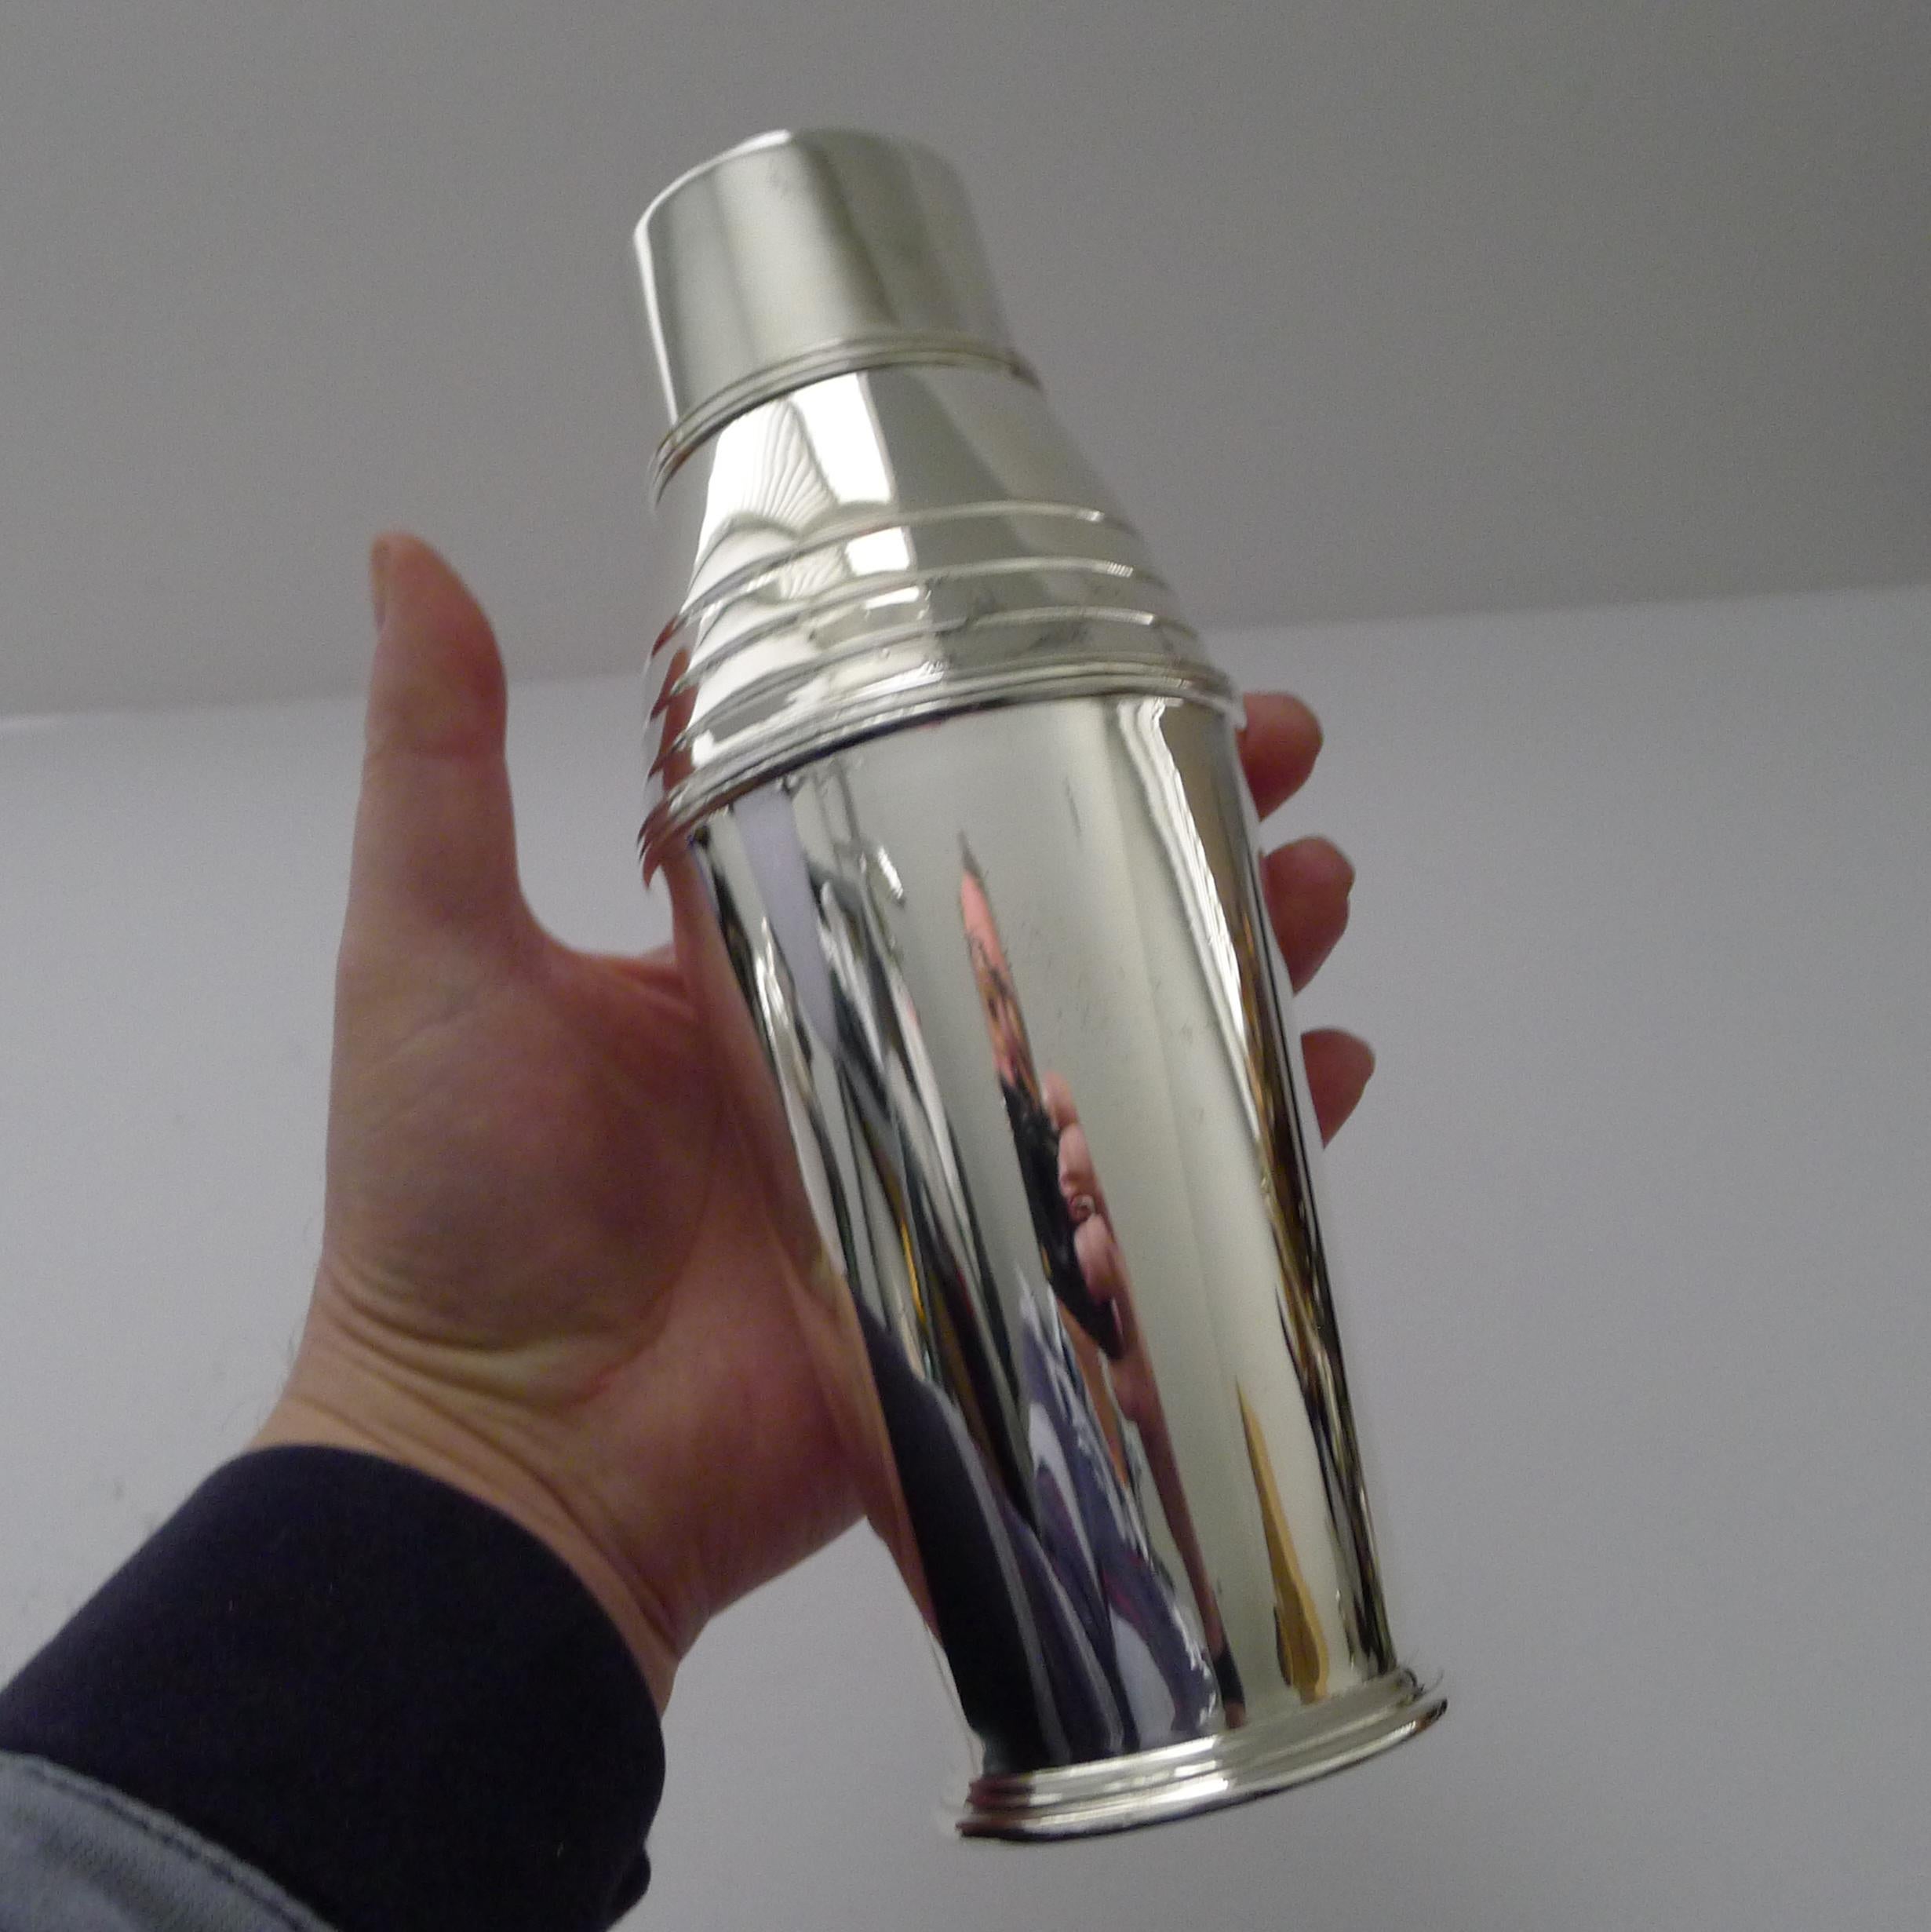 A striking silver plated cocktail shaker in a terrific Art Deco shape.

Just back from our silversmith's workshop where it has been professionally cleaned and polished, restoring it to it's former glory.

The underside is fully marked for the